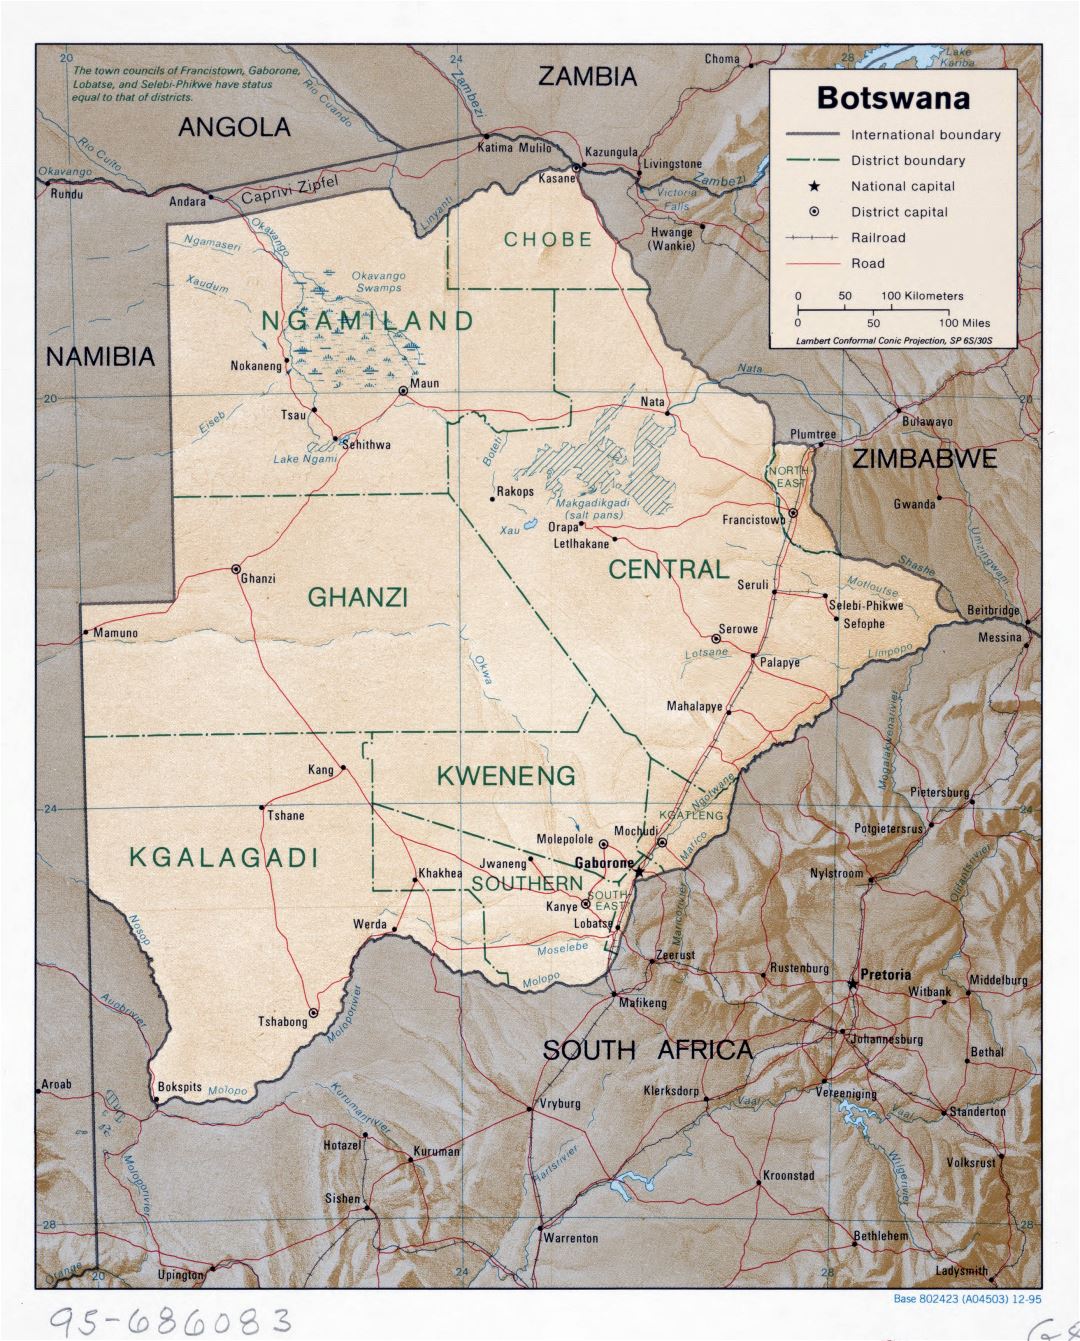 Large scale political and administrative map of Botswana with relief, roads, railroads and major cities - 1995